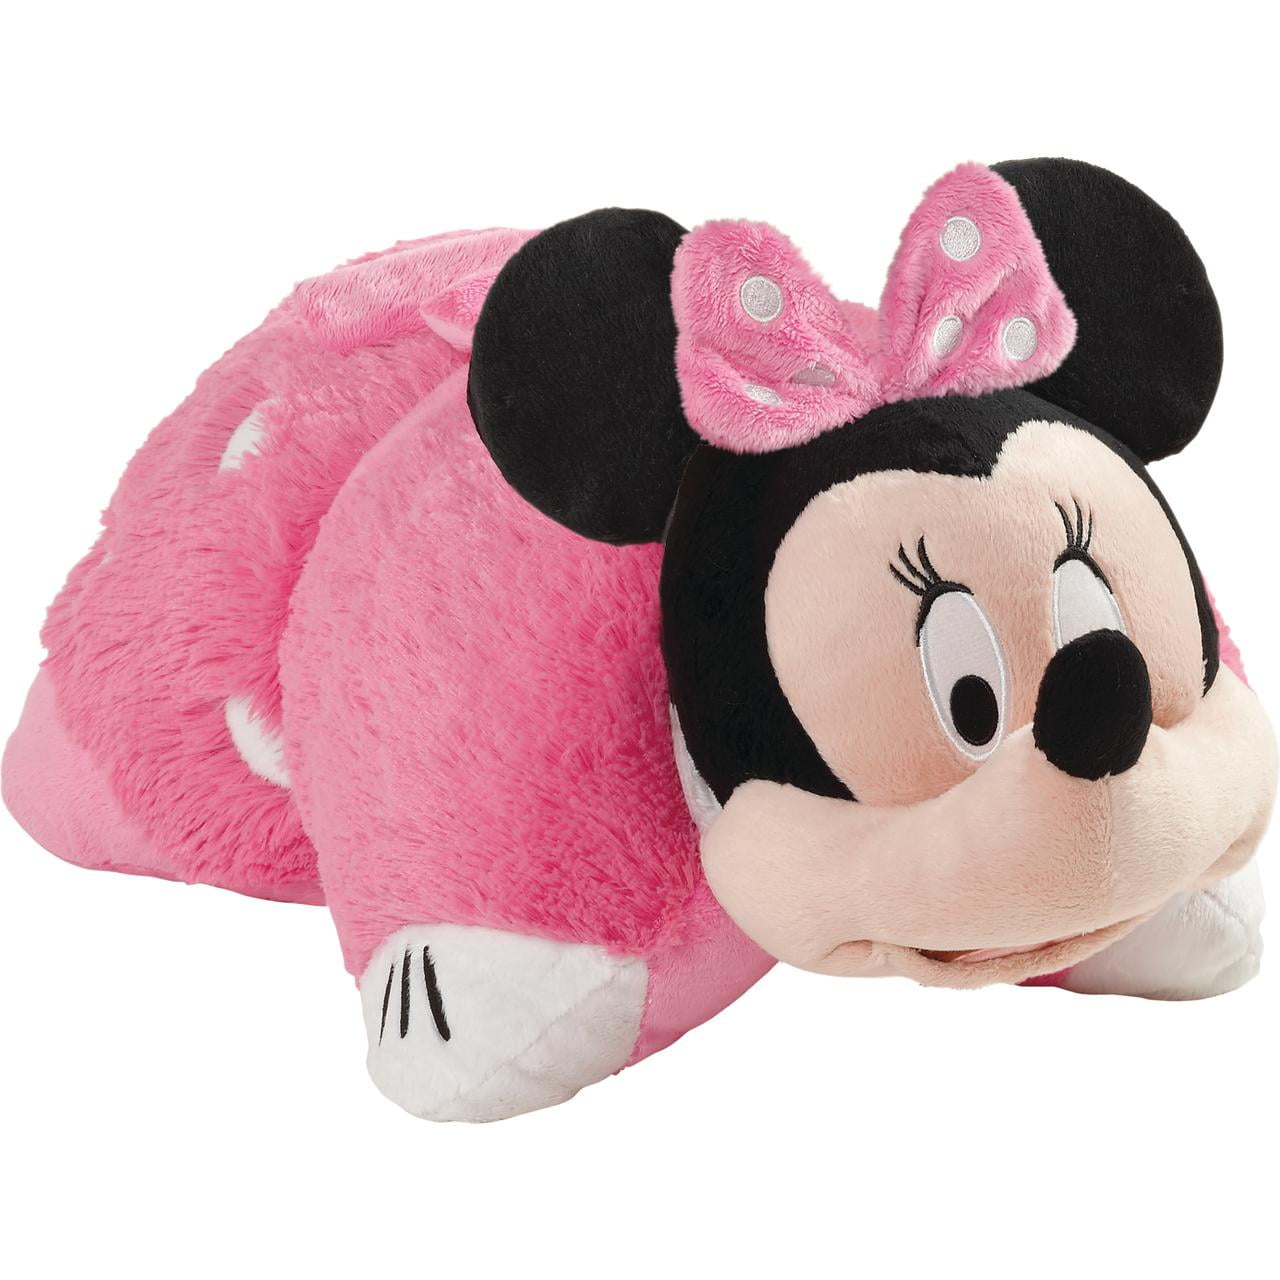 My Pillow Pets 2147 Wiggly Pig 18 Inches for sale online 